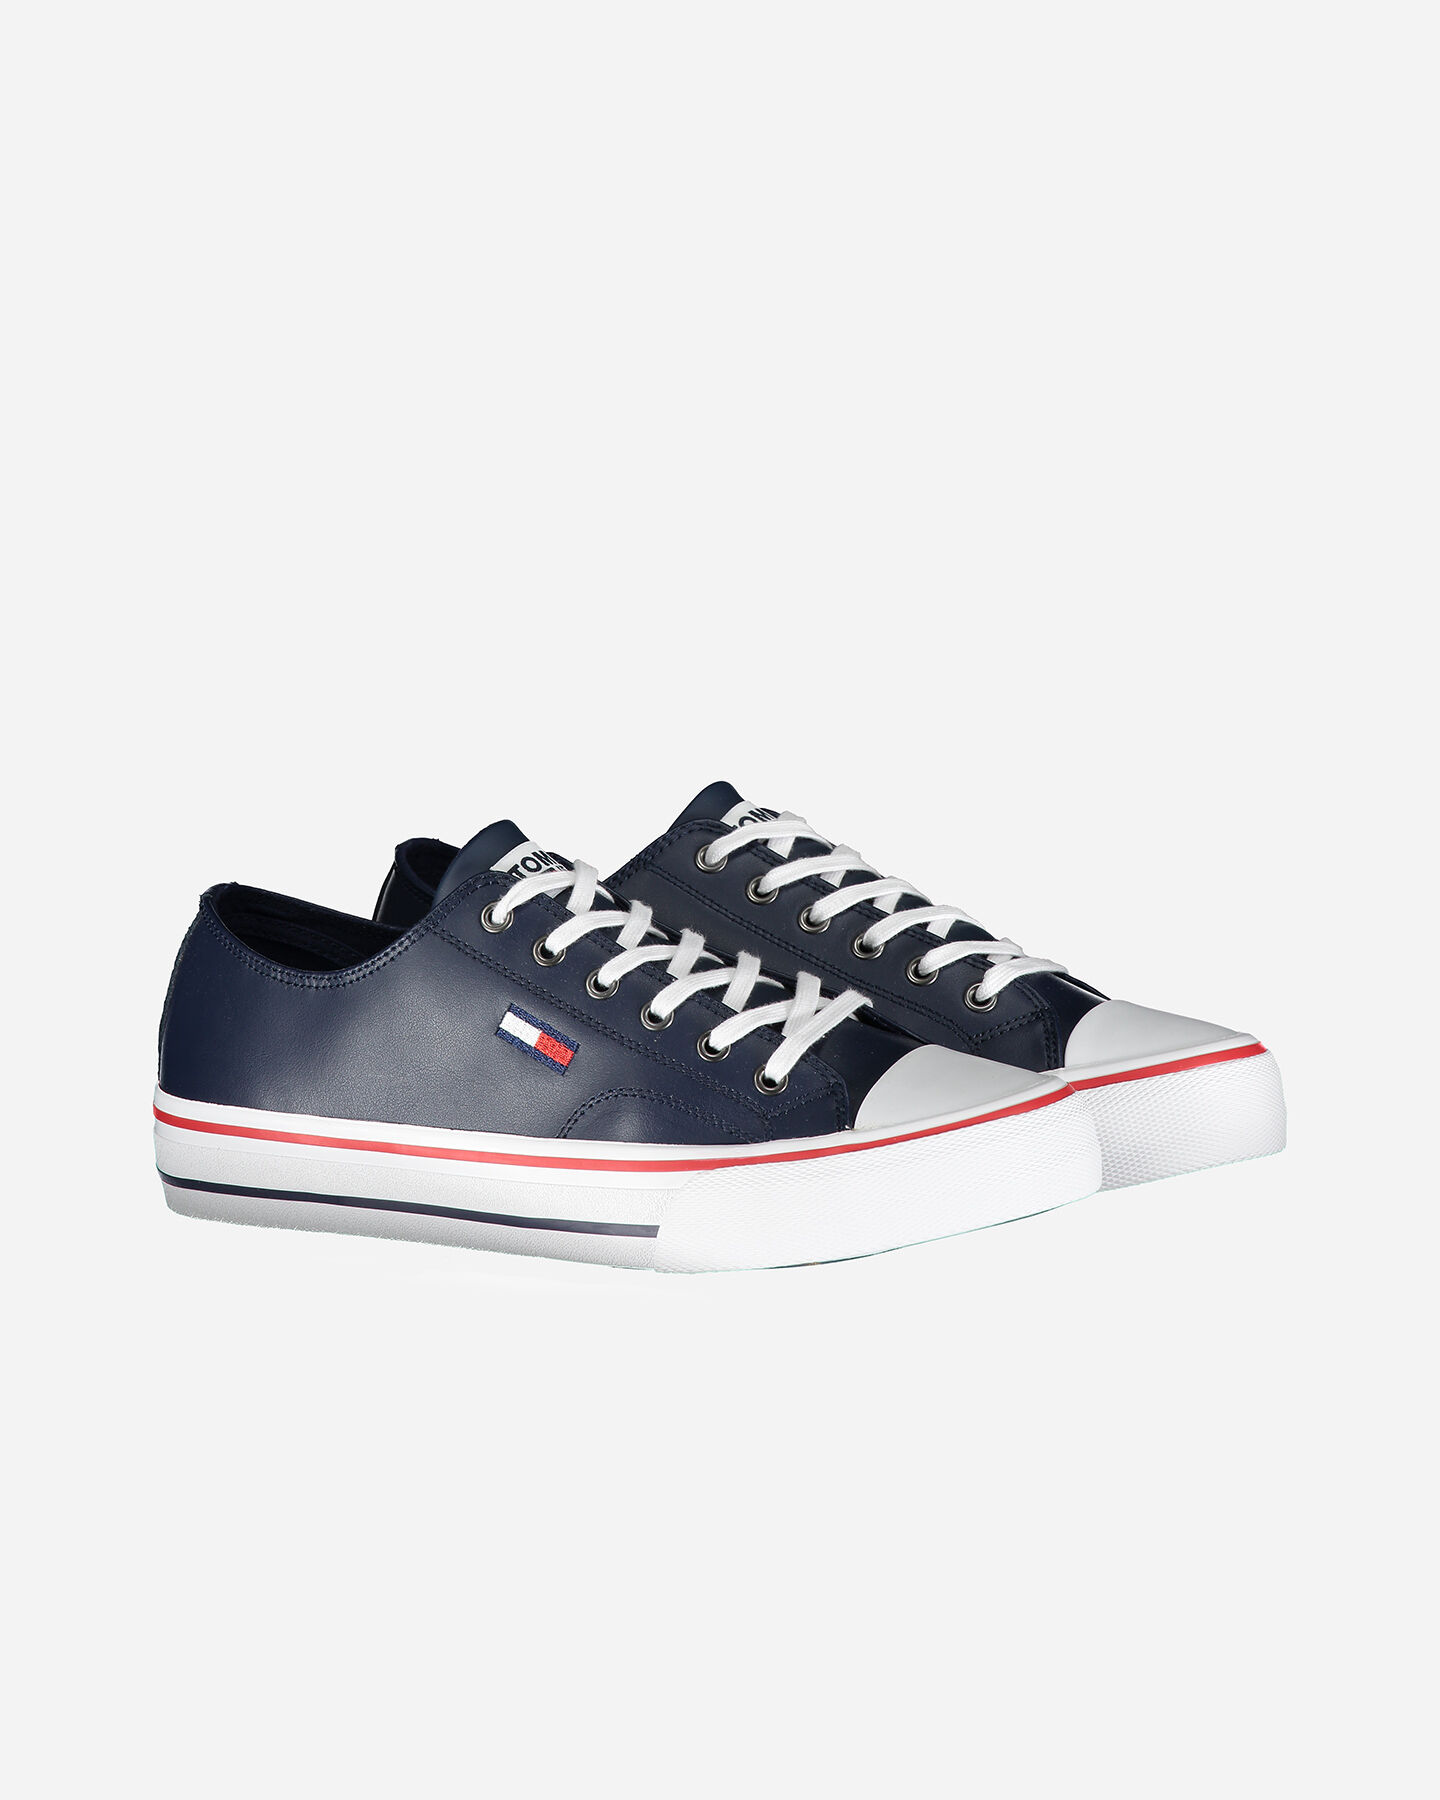  Scarpe sneakers TOMMY HILFIGER ICONIC CITY M S4074055|CBK|40 scatto 1